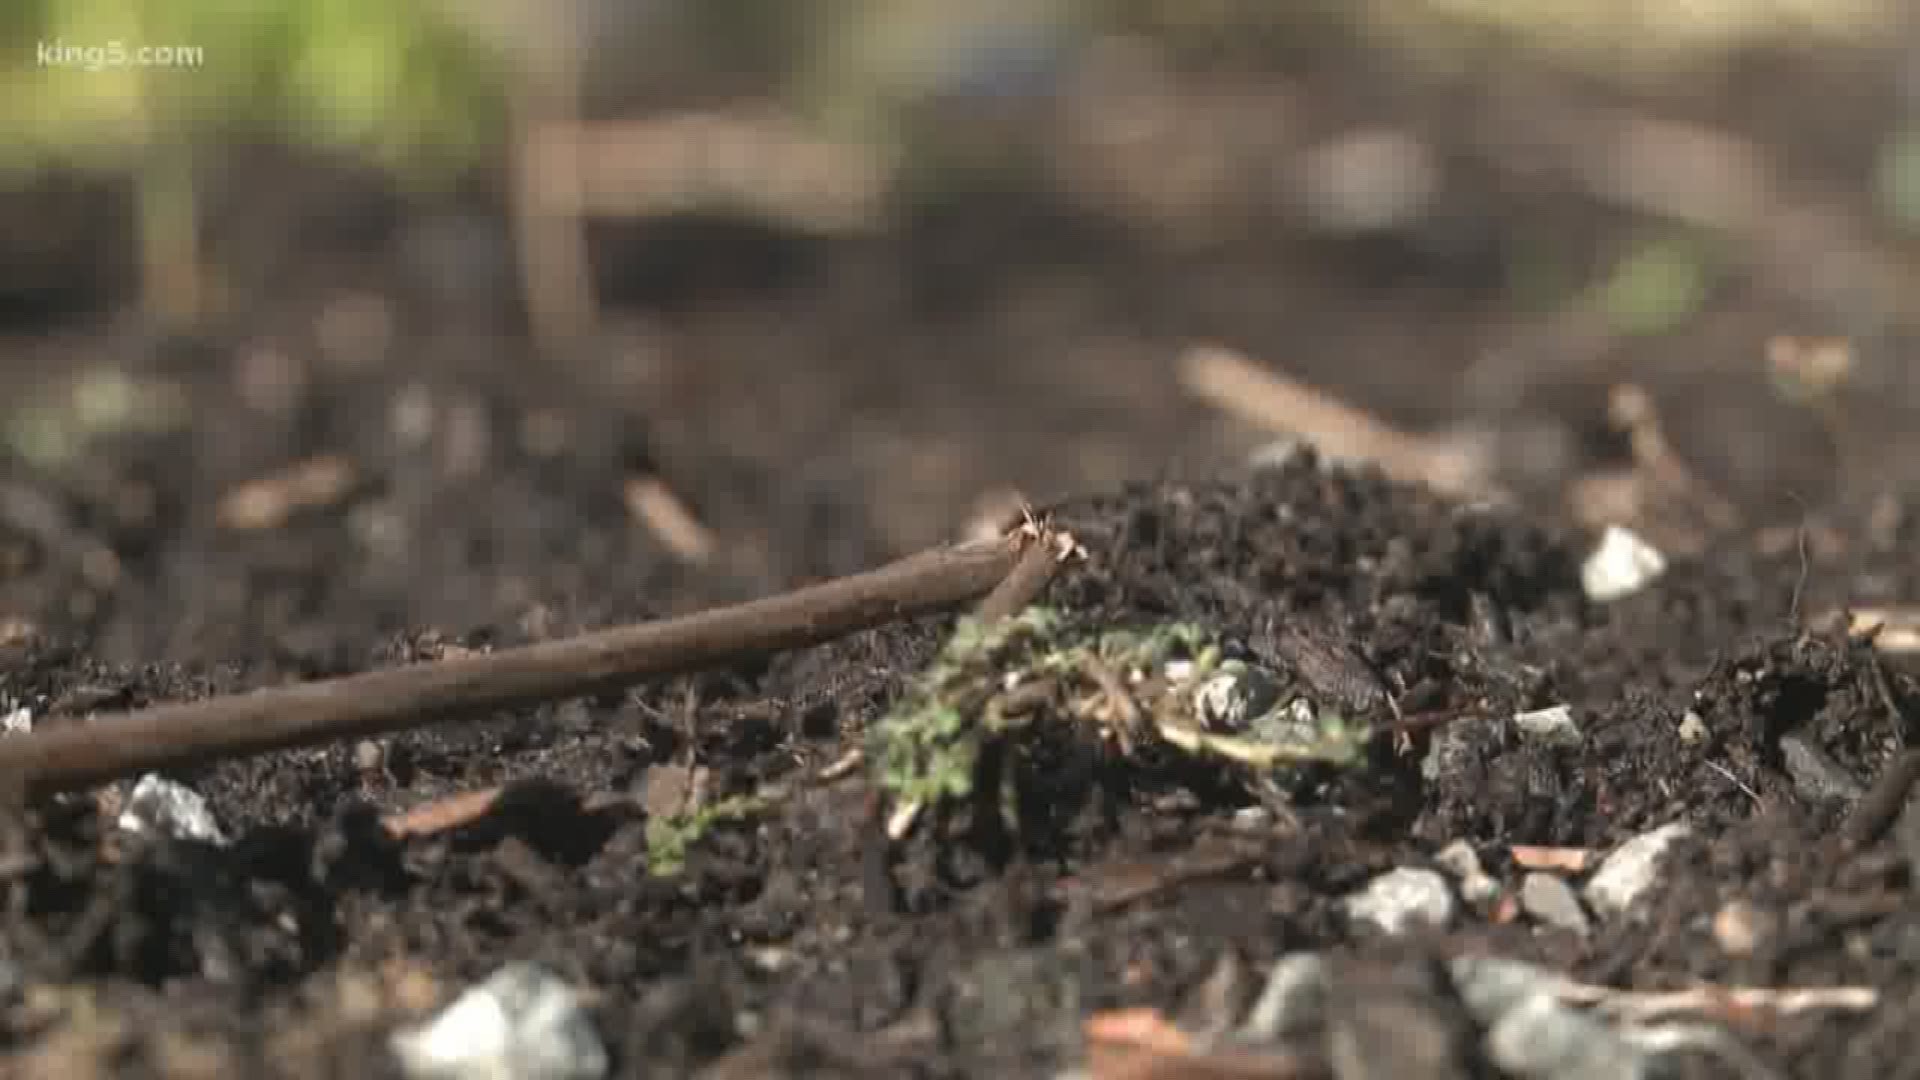 A bill that would make it legal to compost human remains in Washington state has passed the senate, and is now headed to the house for a vote. KING 5 Environmental Reporter Alison Morrow spoke with one of the state's biggest advocates, about why she calls it a more eco-friendly option.